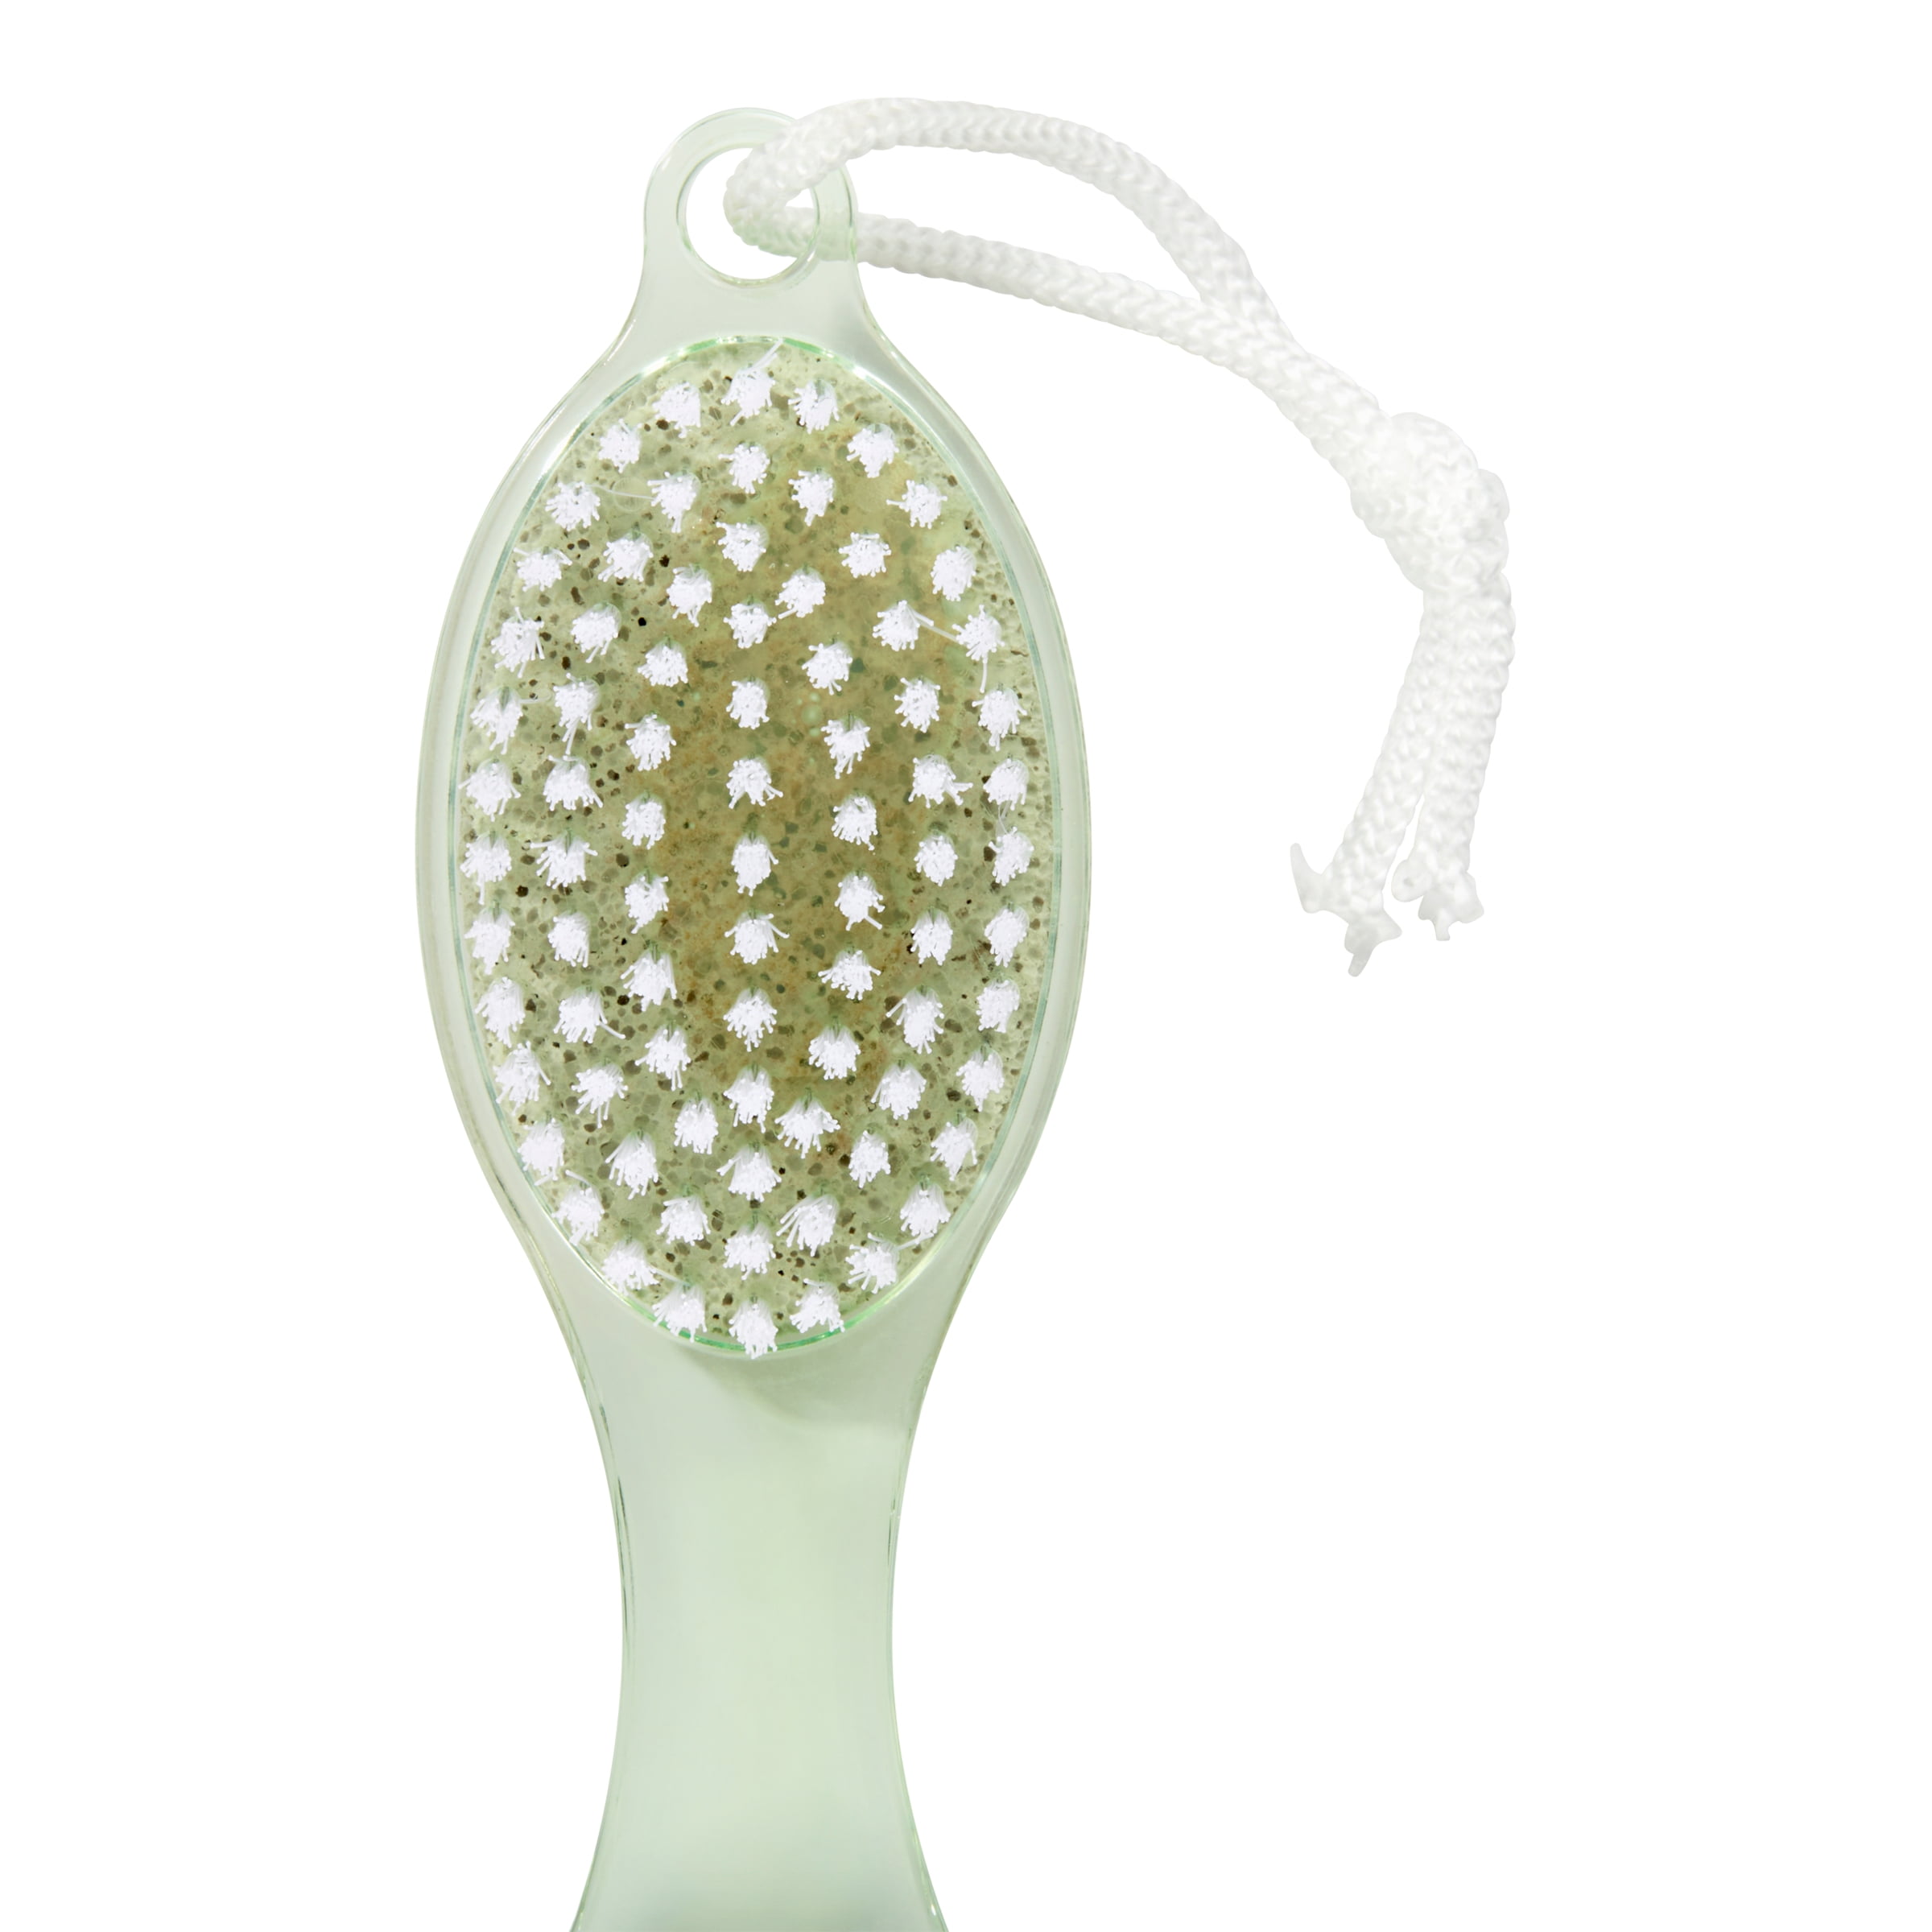 Equate Beauty 4-in-1 Foot Wand, Exfoliating Foot Brush, for